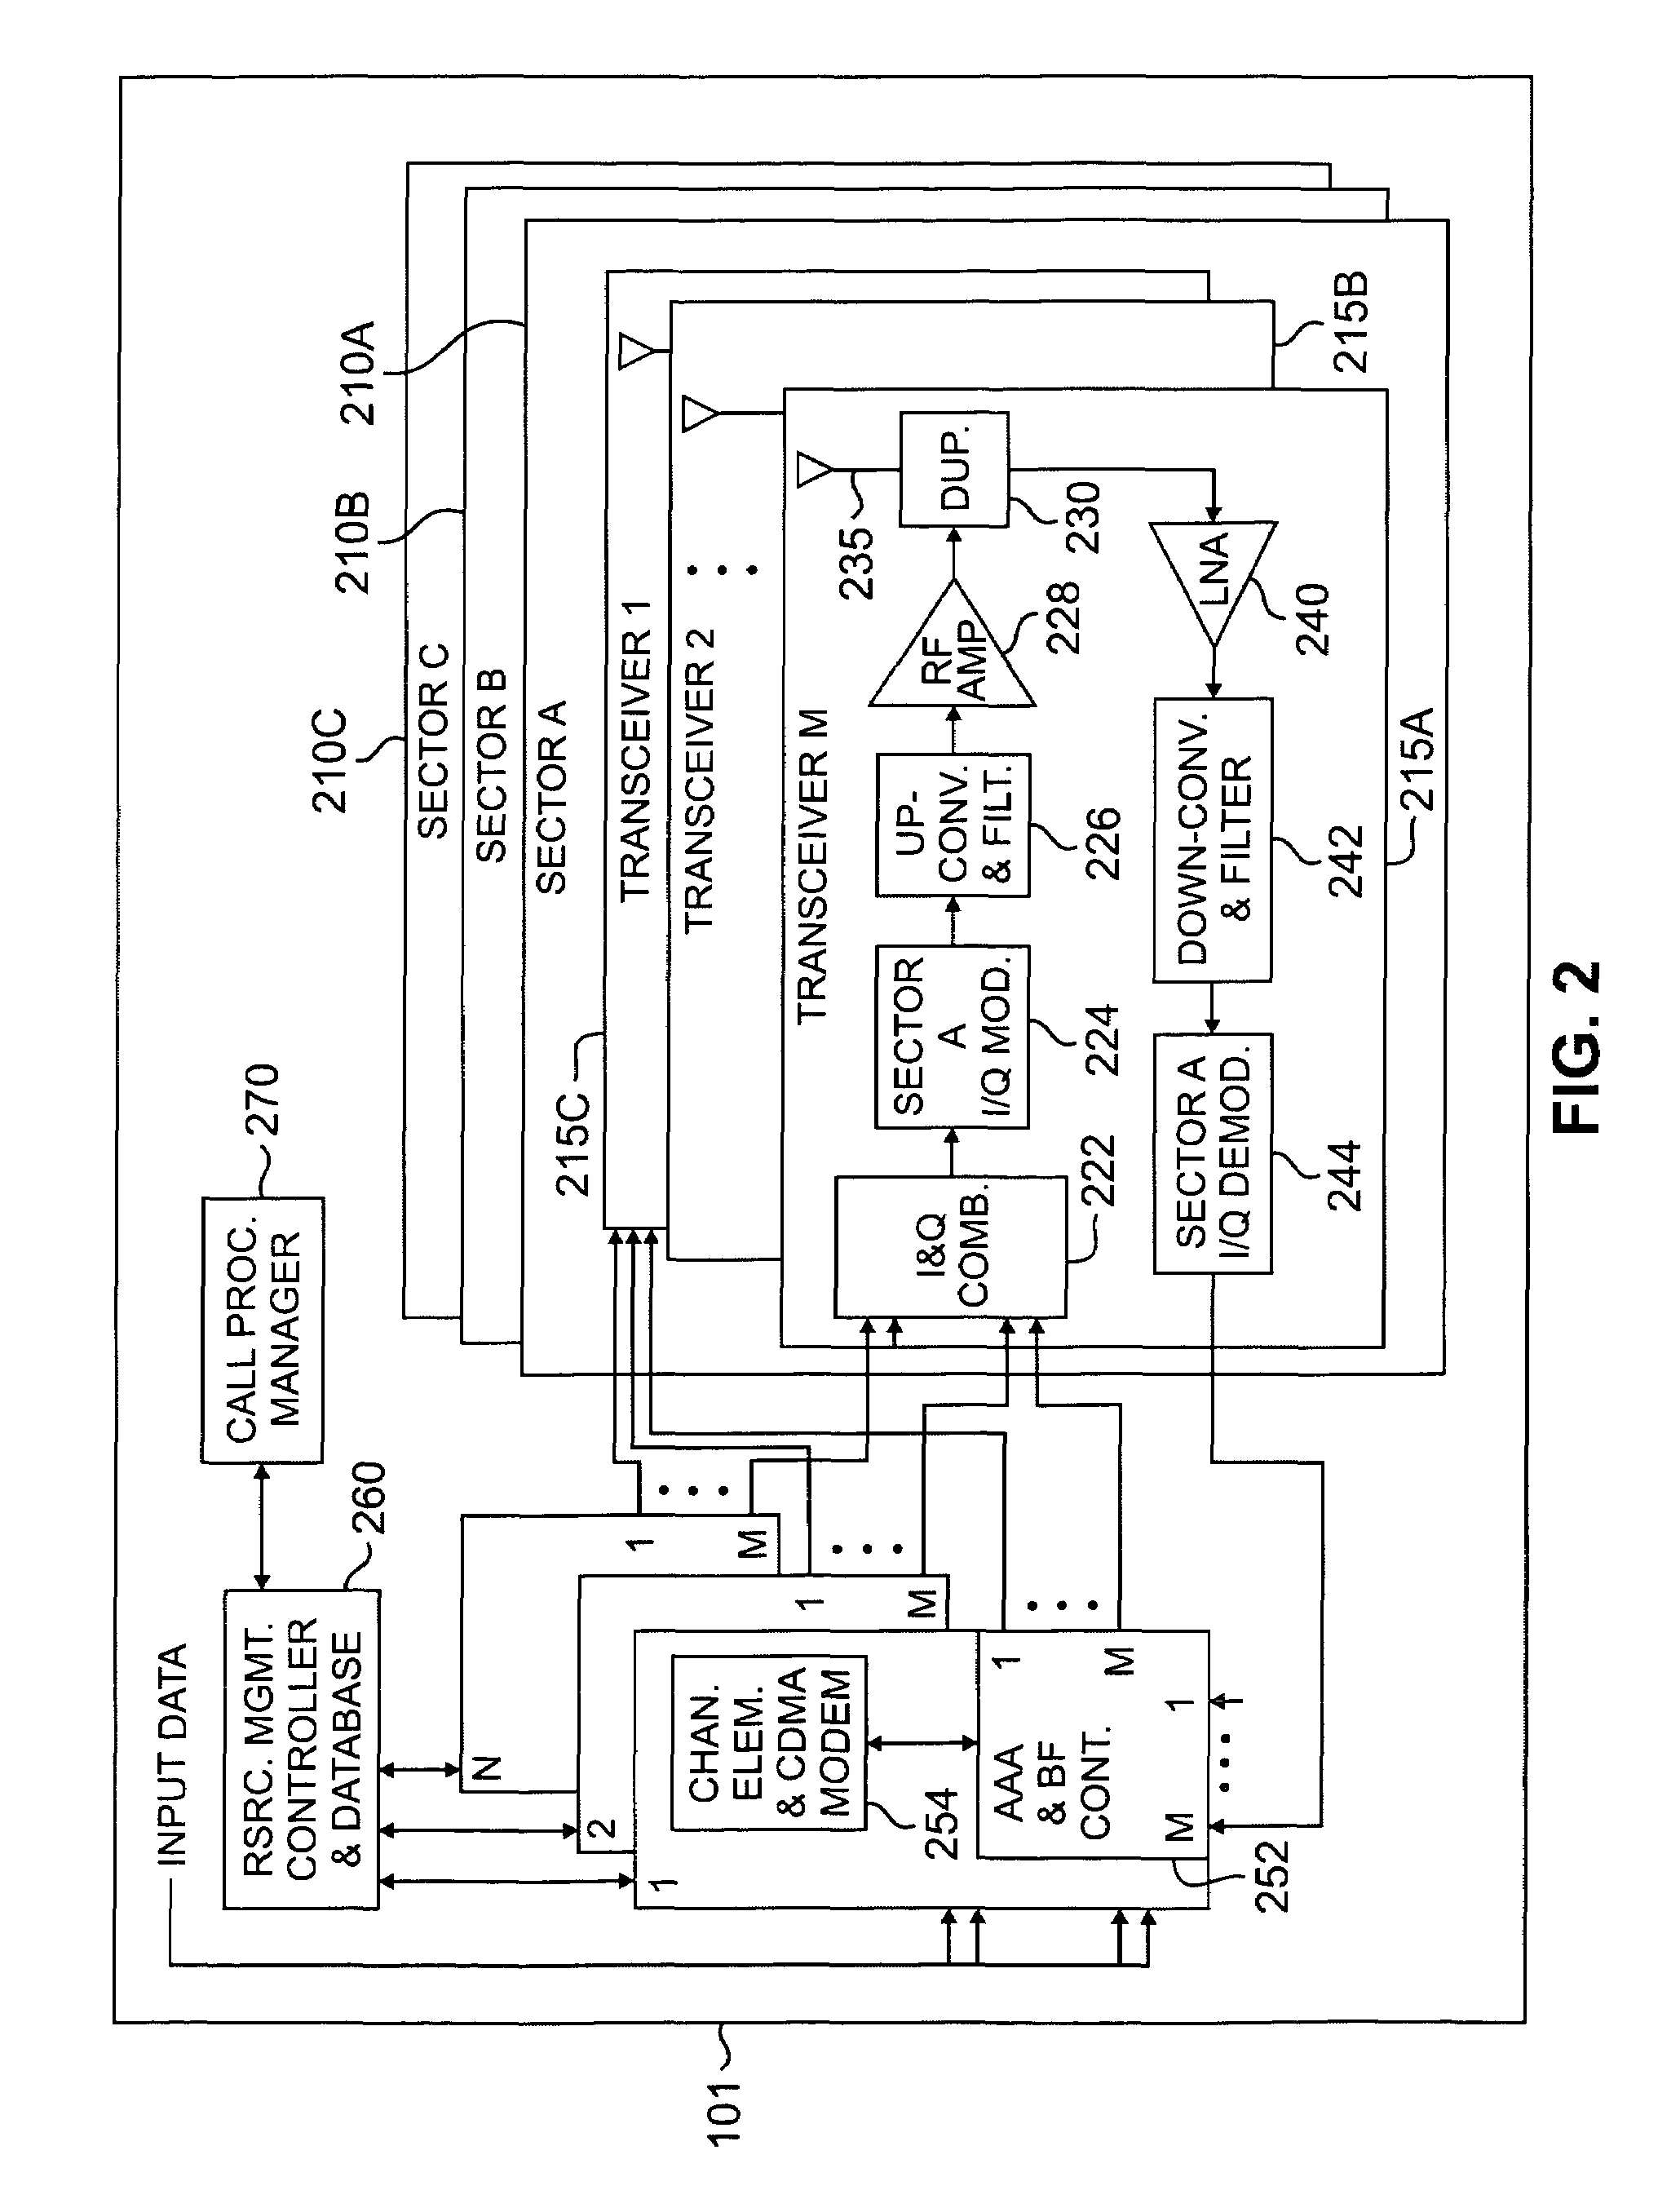 Apparatus and method for allocating walsh codes to access terminals in an adaptive antenna array CDMA wireless network